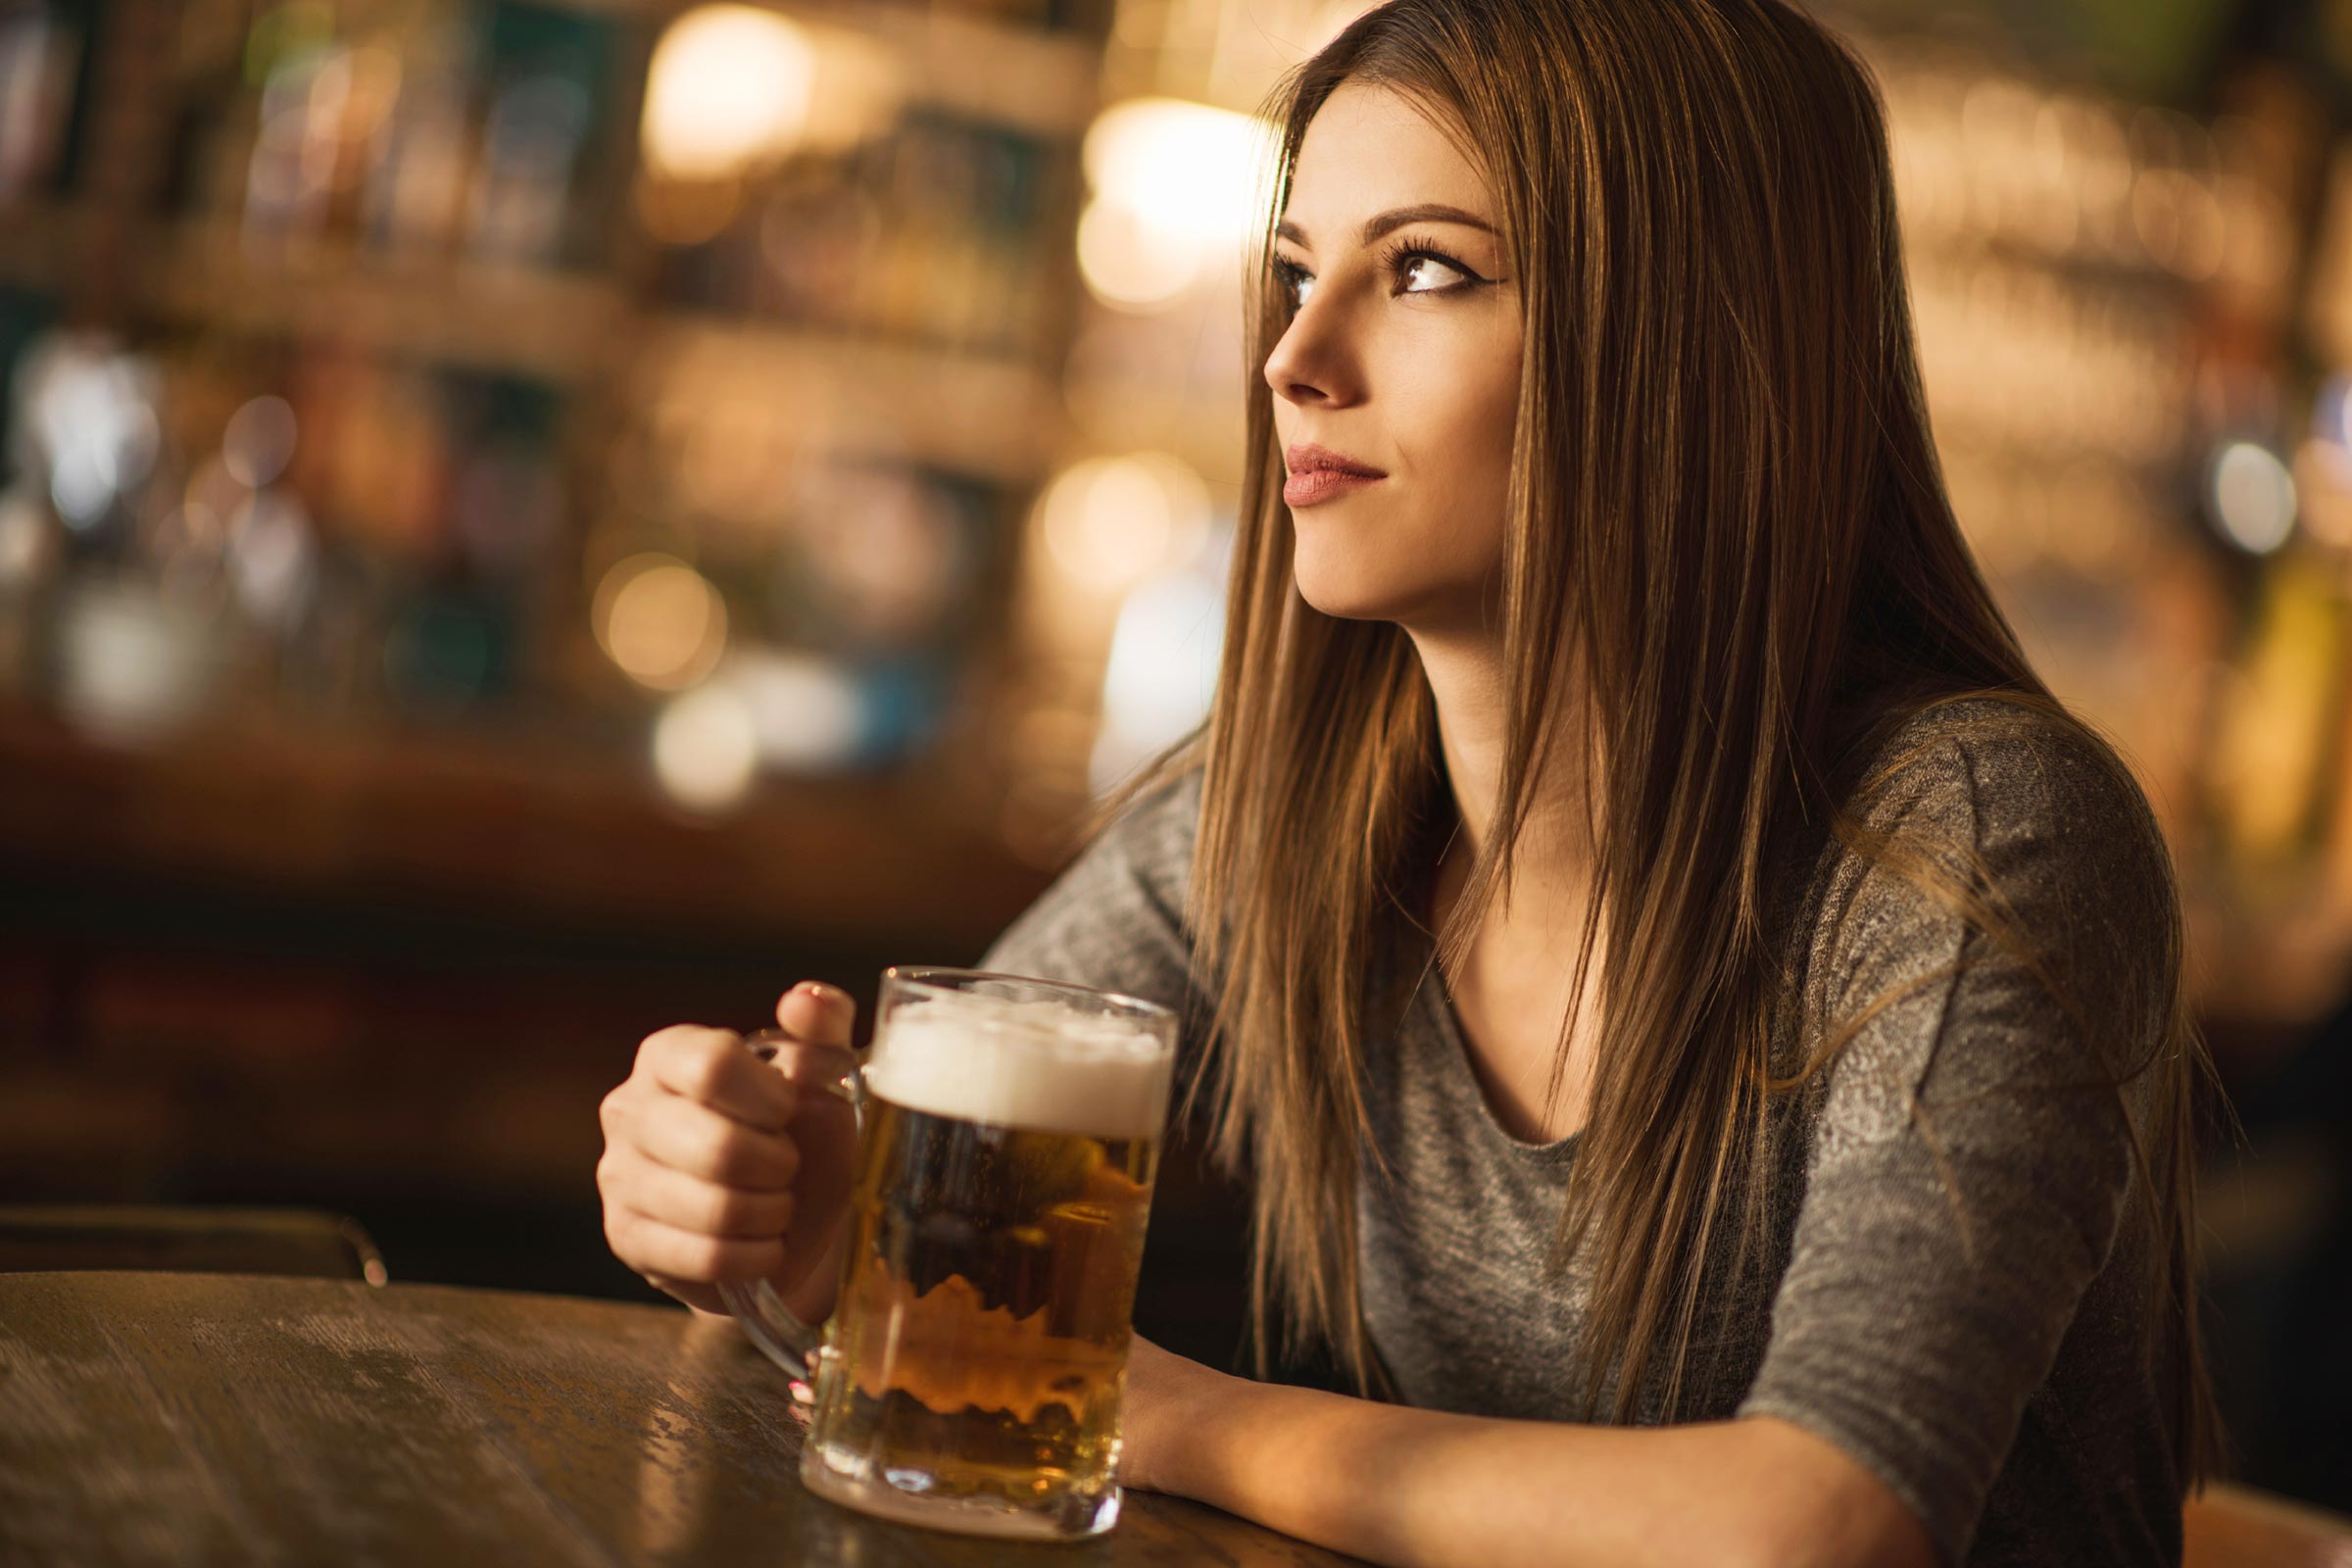 Do Women React Differently to Alcohol?